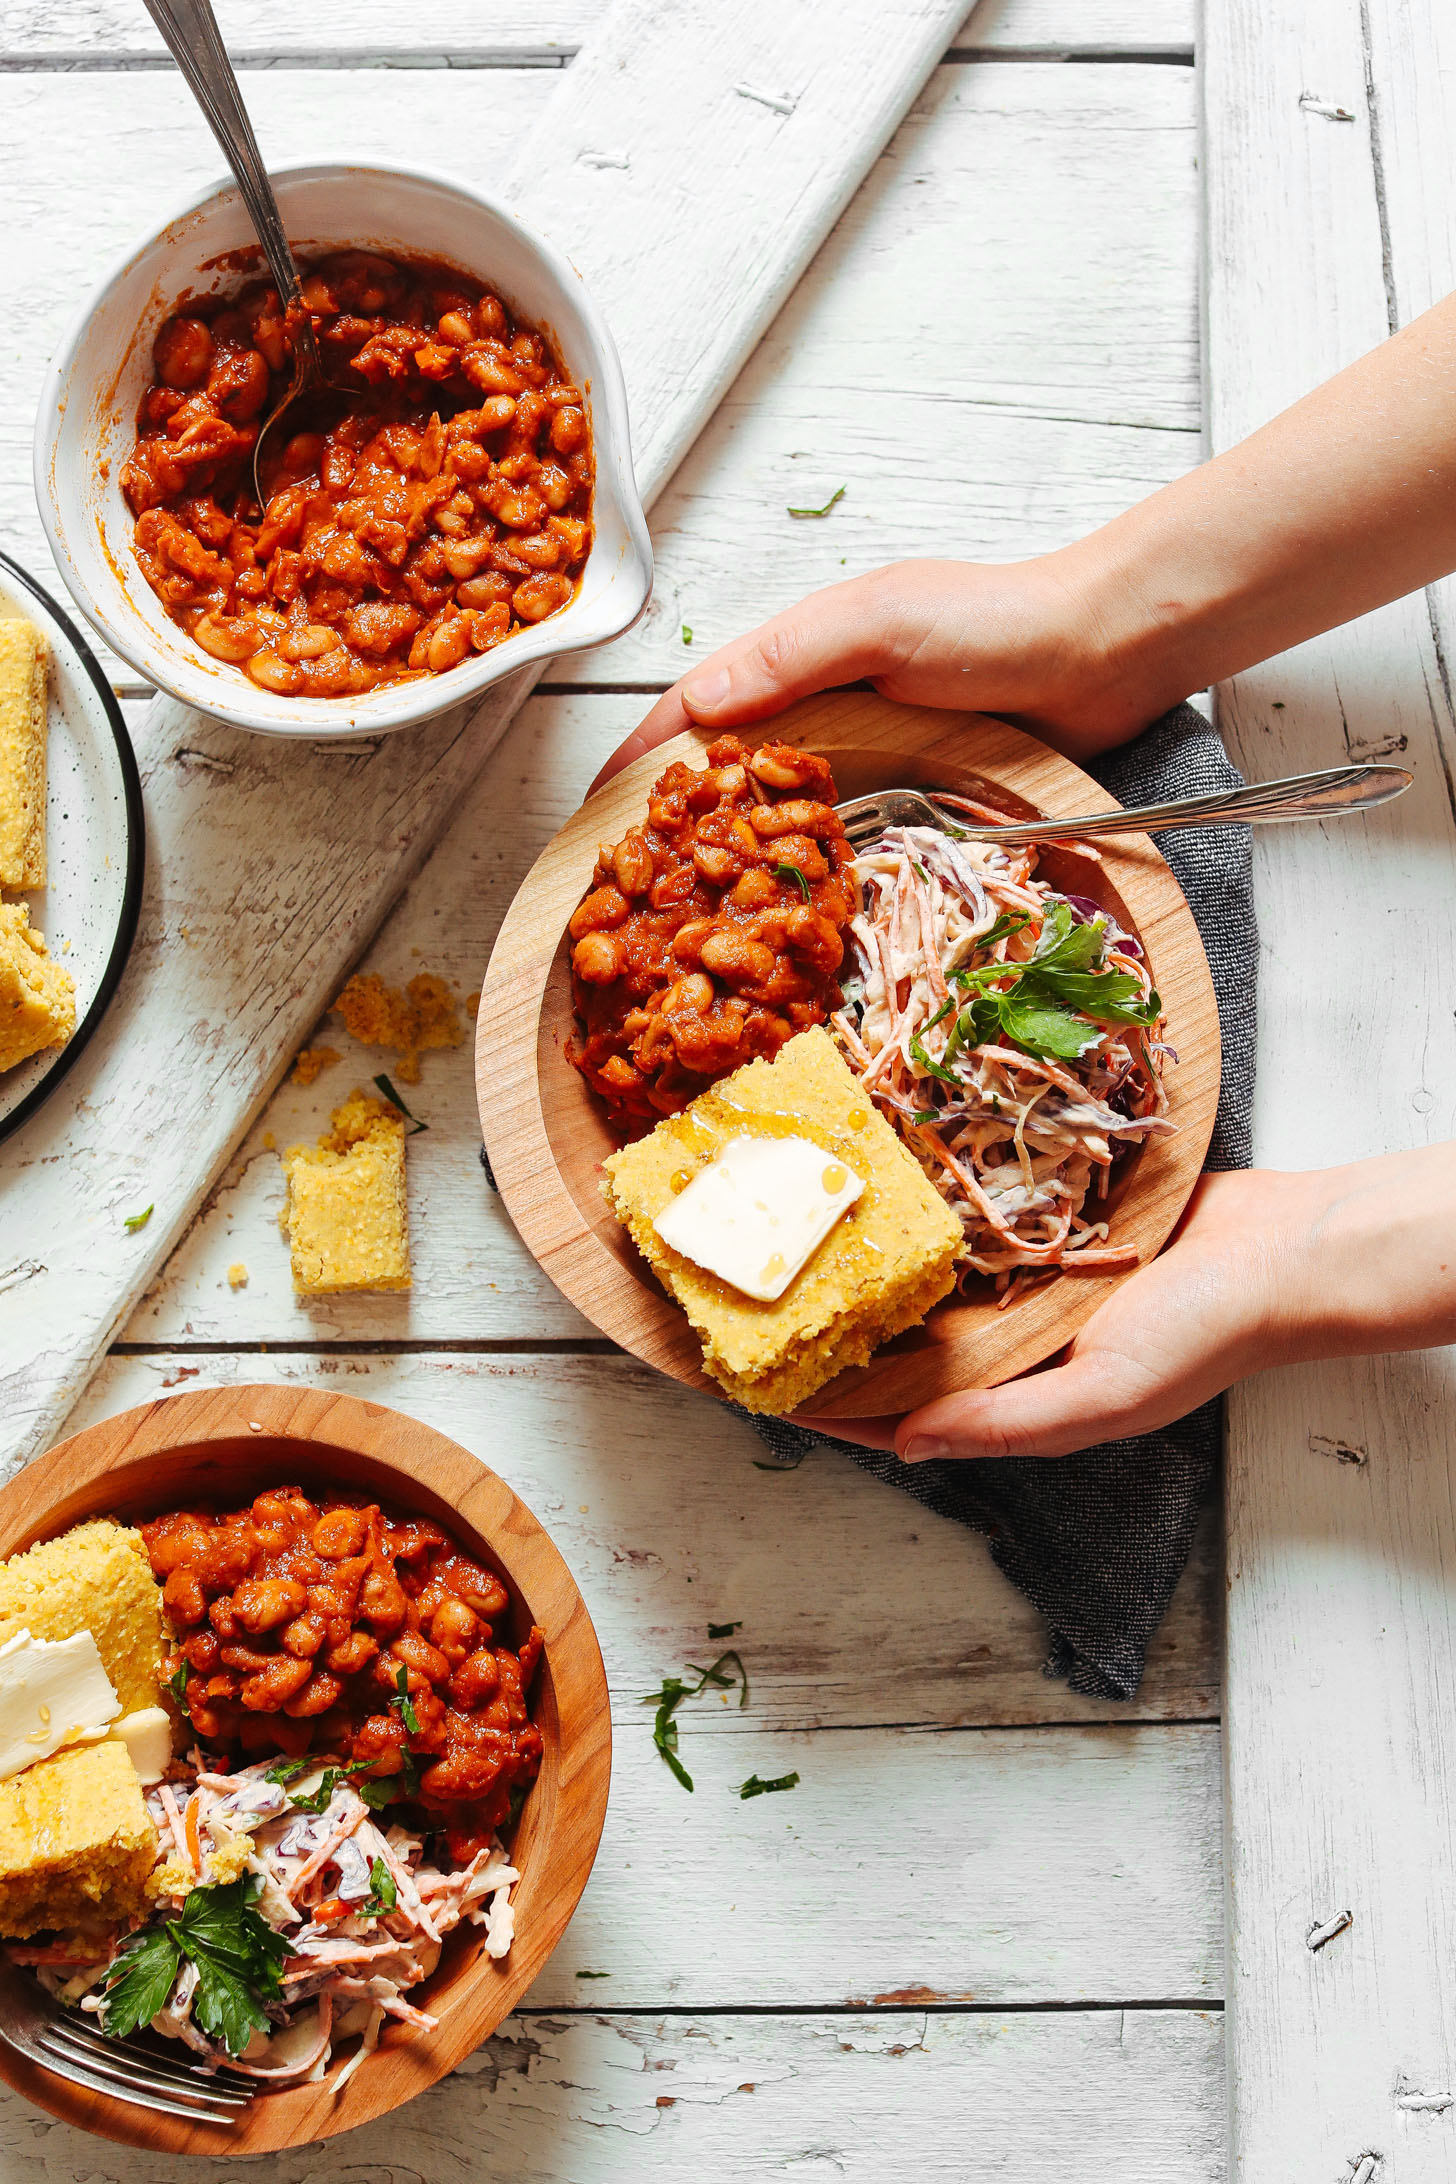 Holding a BBQ Bowl with Baked Beans, Vegan Coleslaw, and GF Cornbread